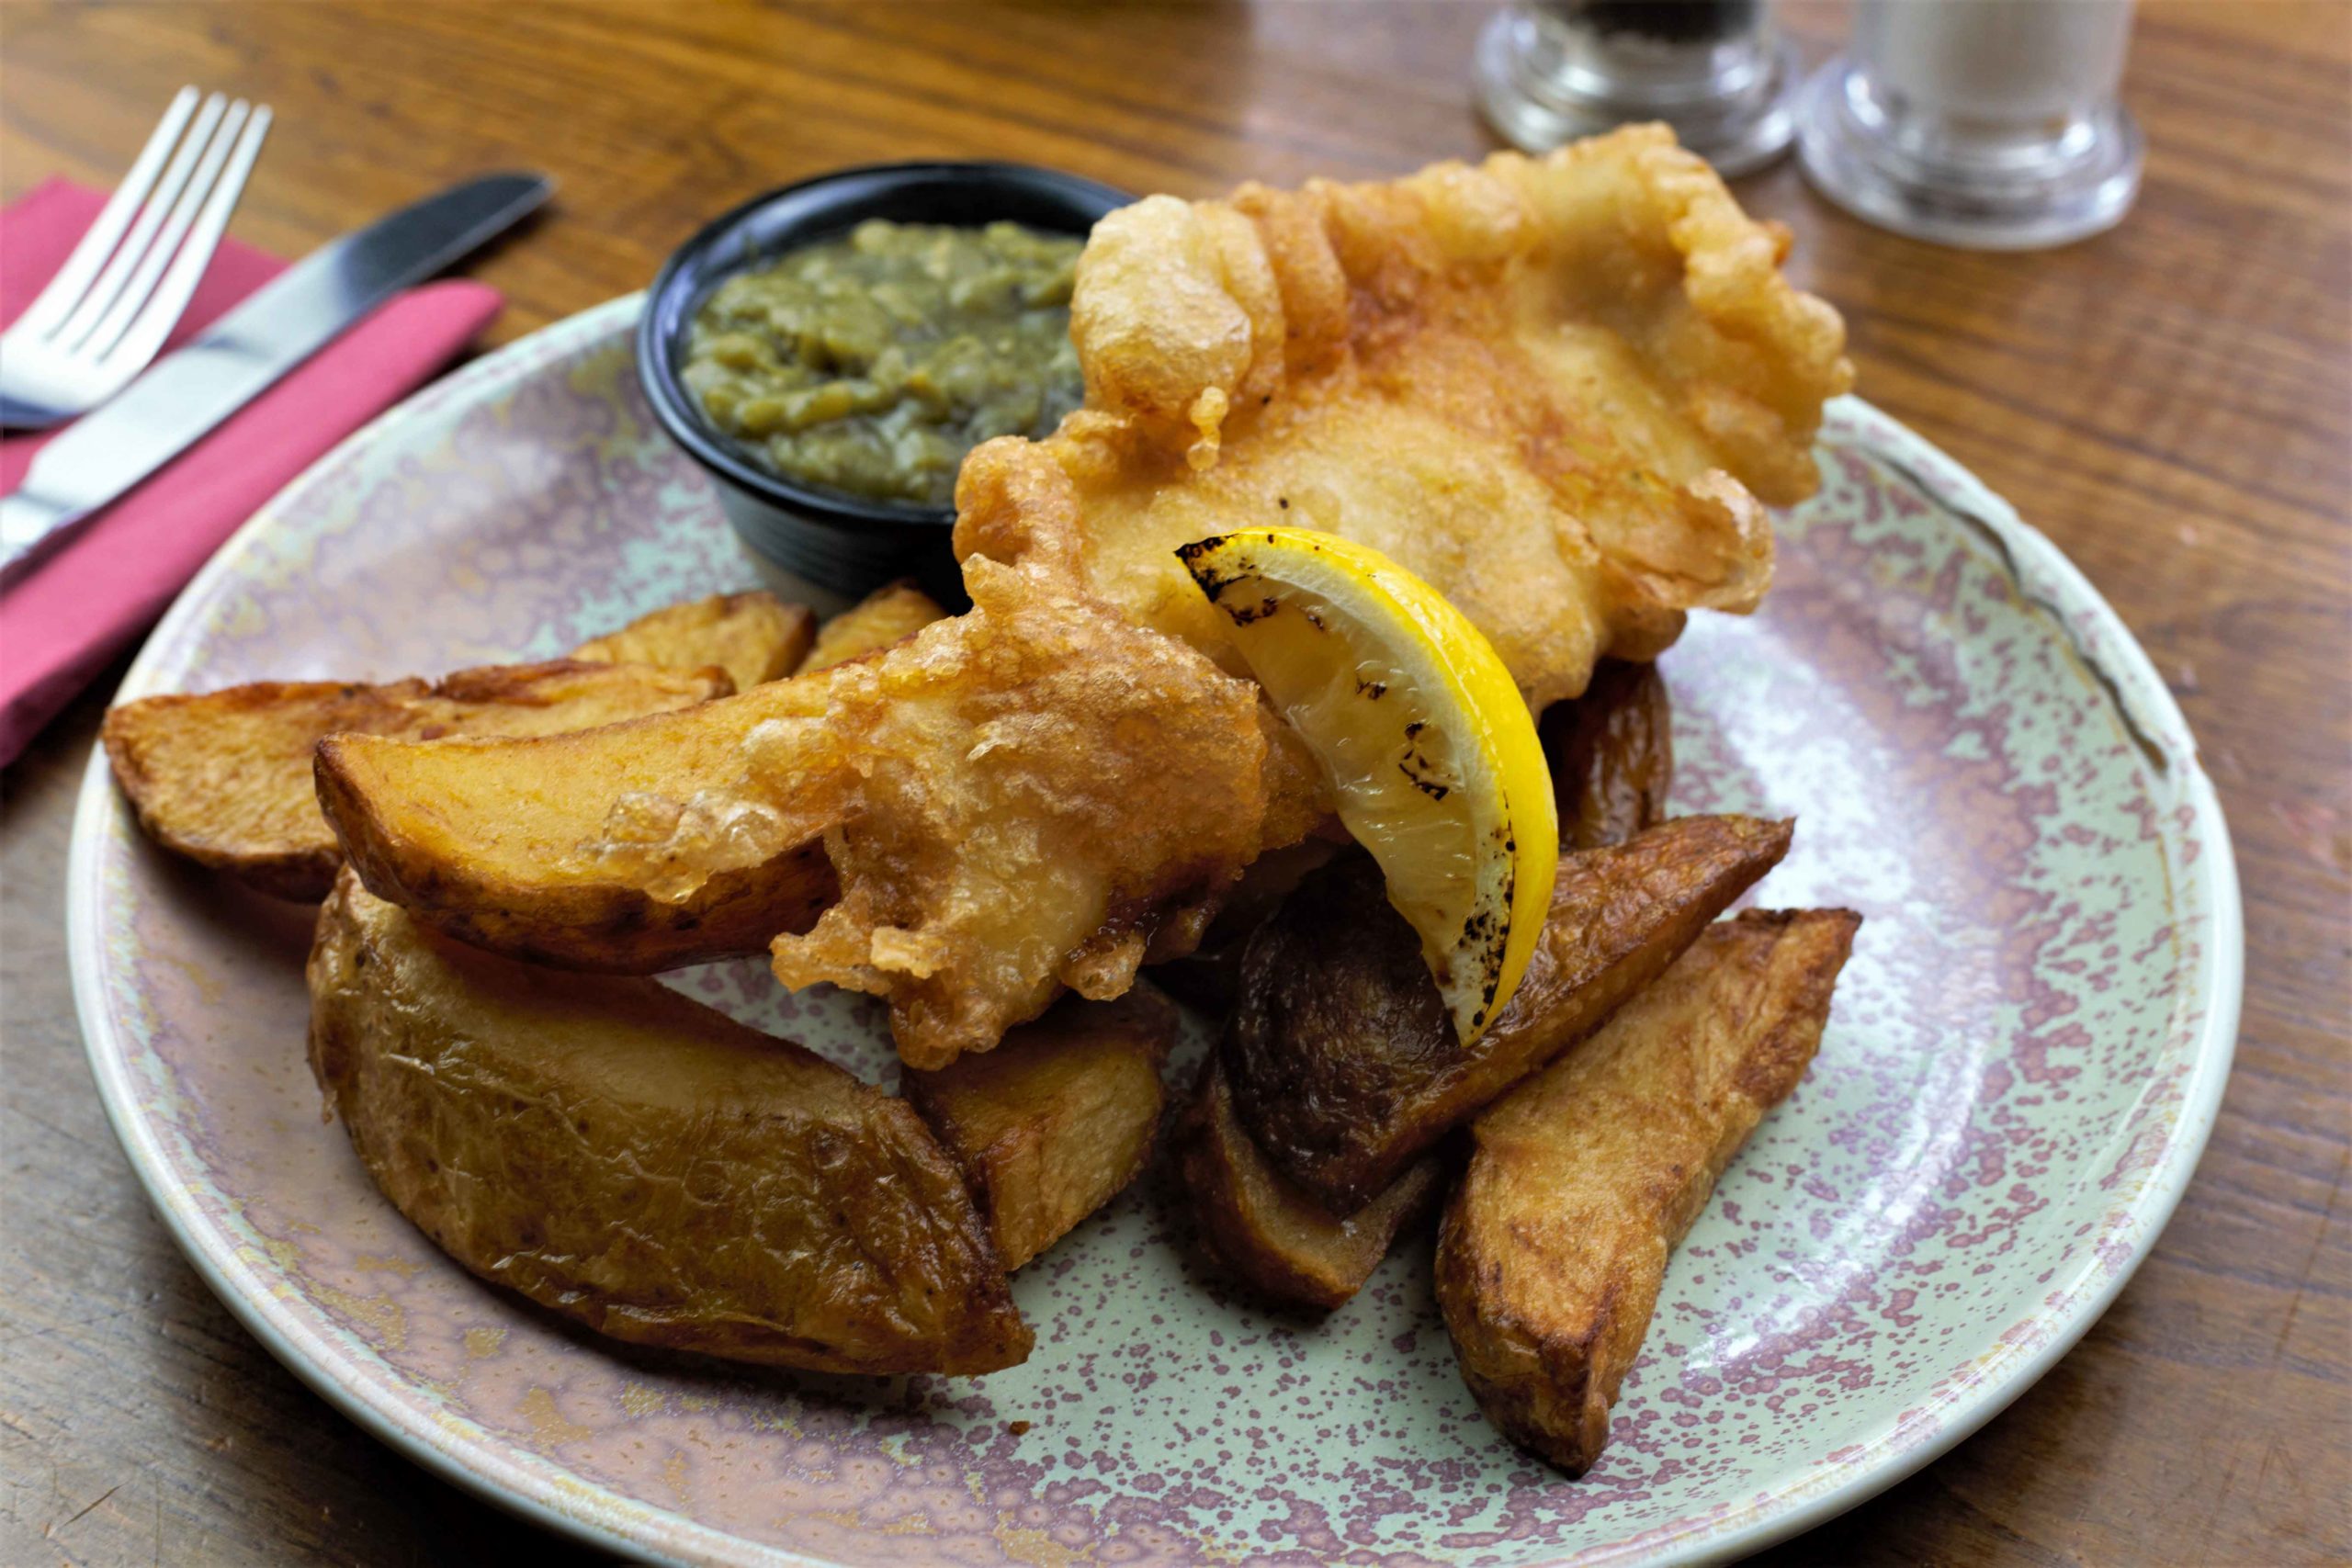 Fish and chips with mushy peas and grilled lemon wedge